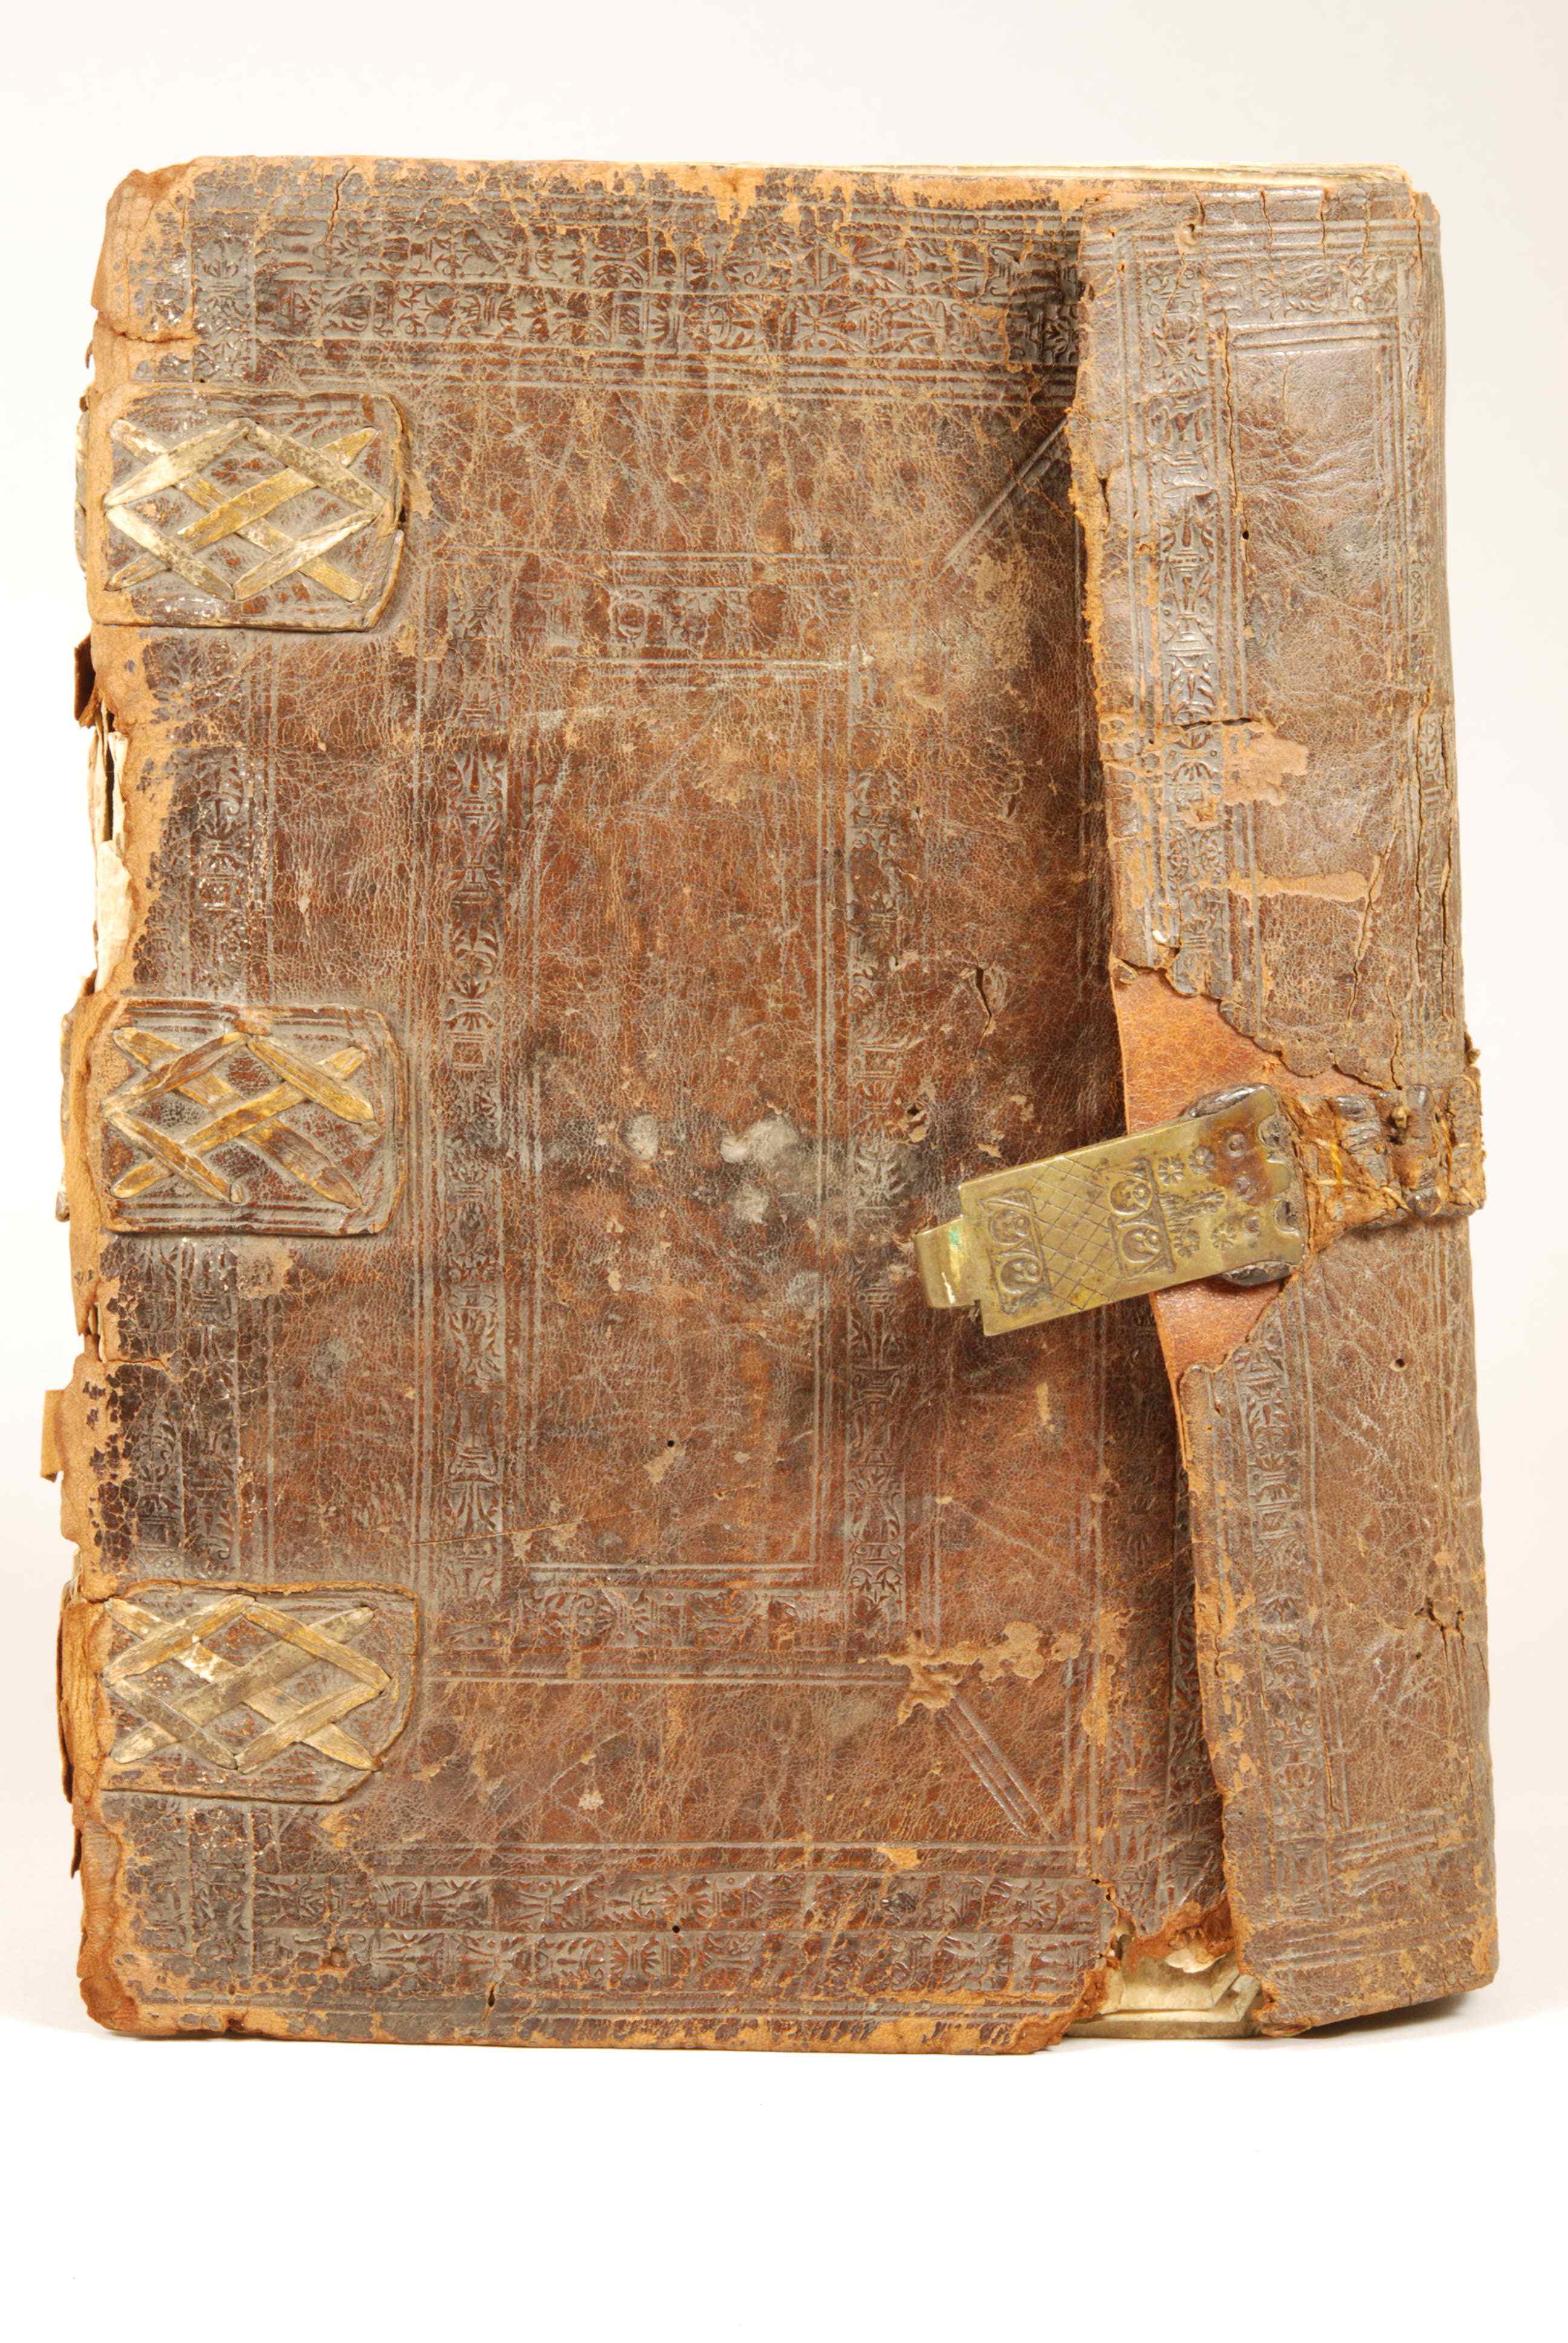 Dartmouth Brut, sixteenth-century cover, courtesy Dartmouth College Library